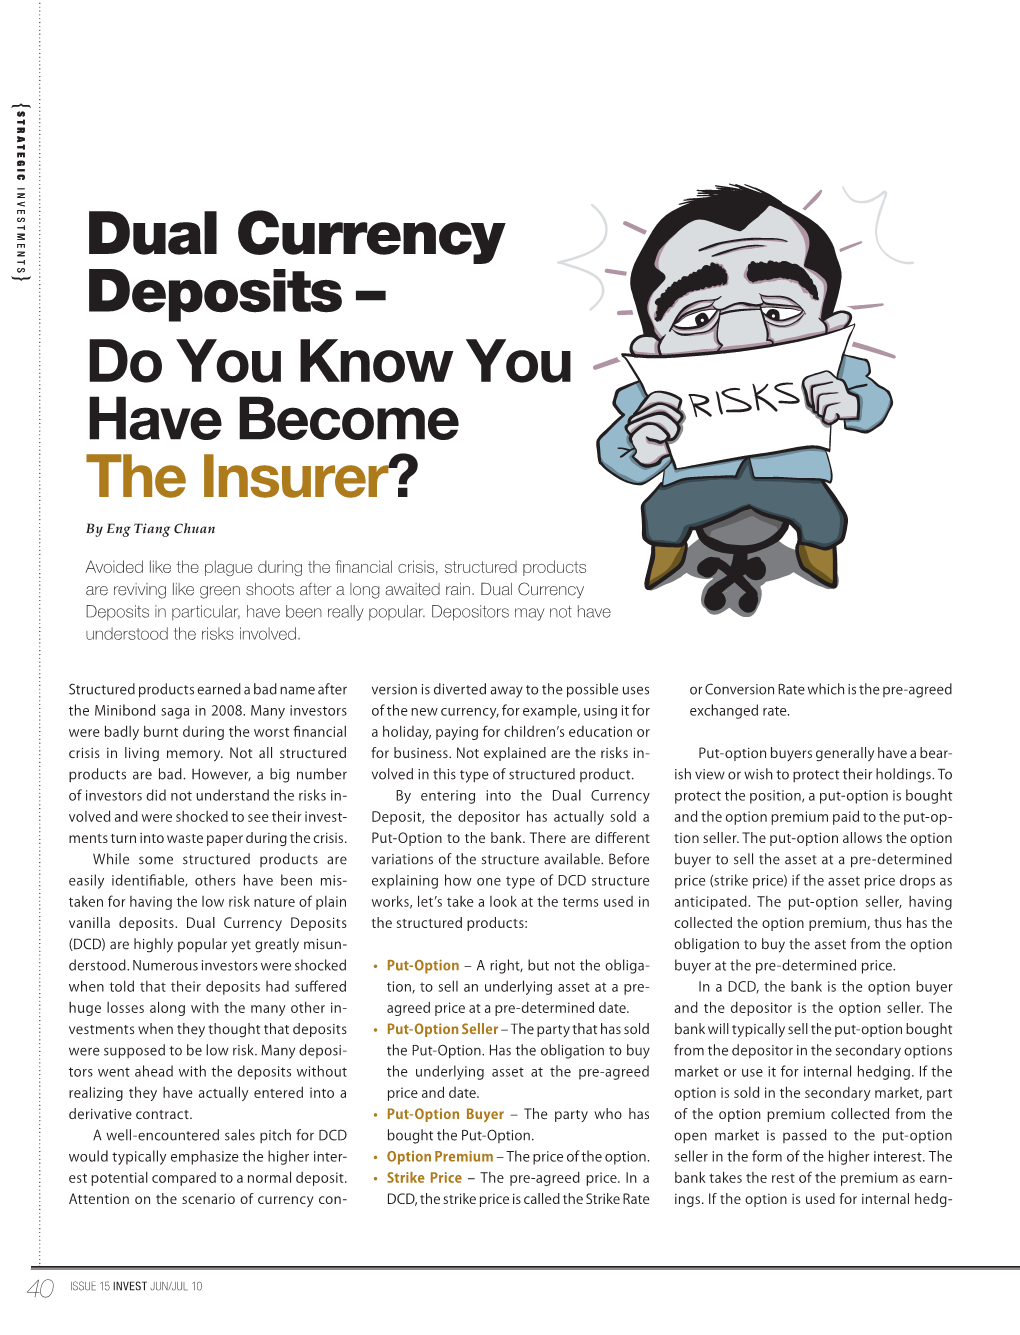 Dual Currency Deposits – Do You Know You Have Become the Insurer?